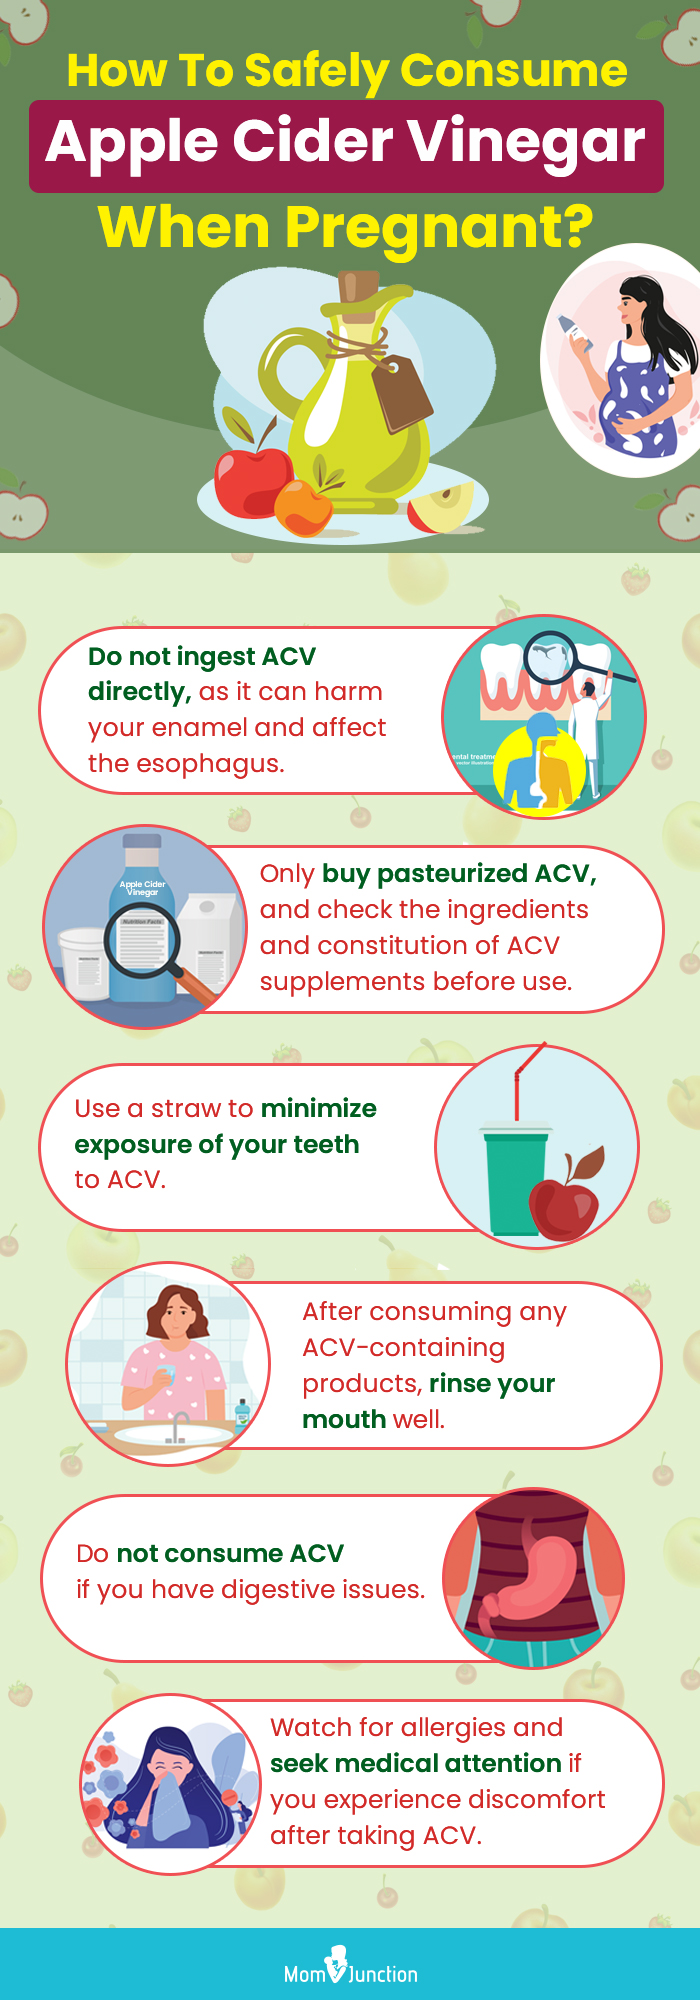 how to safely consume apple cider vinegar when pregnant (infographic)